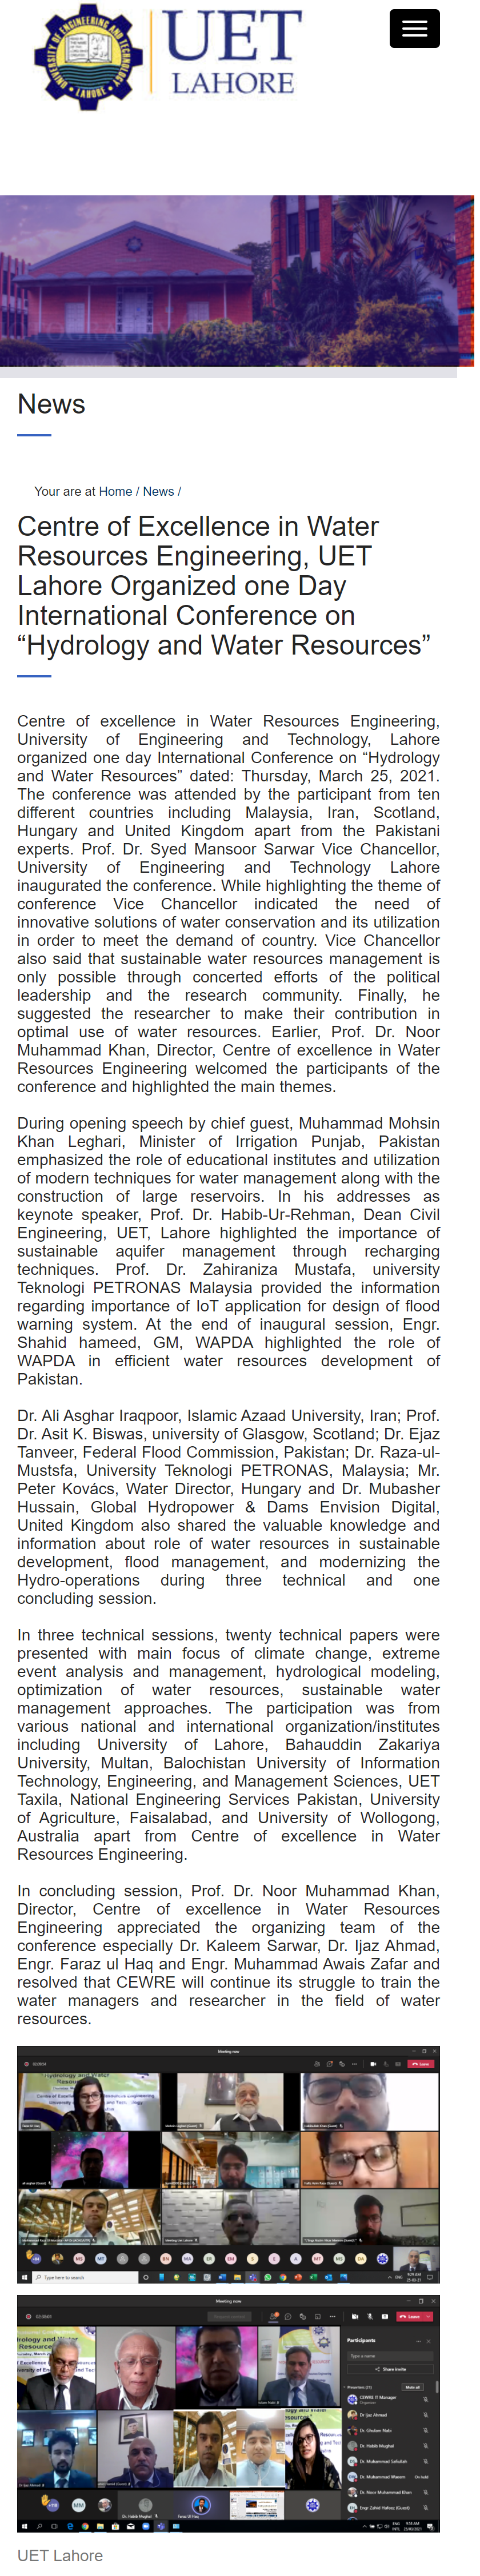 UET News - News Highlights on International Conference on Hydrology & Water Resources 2021 - Organi